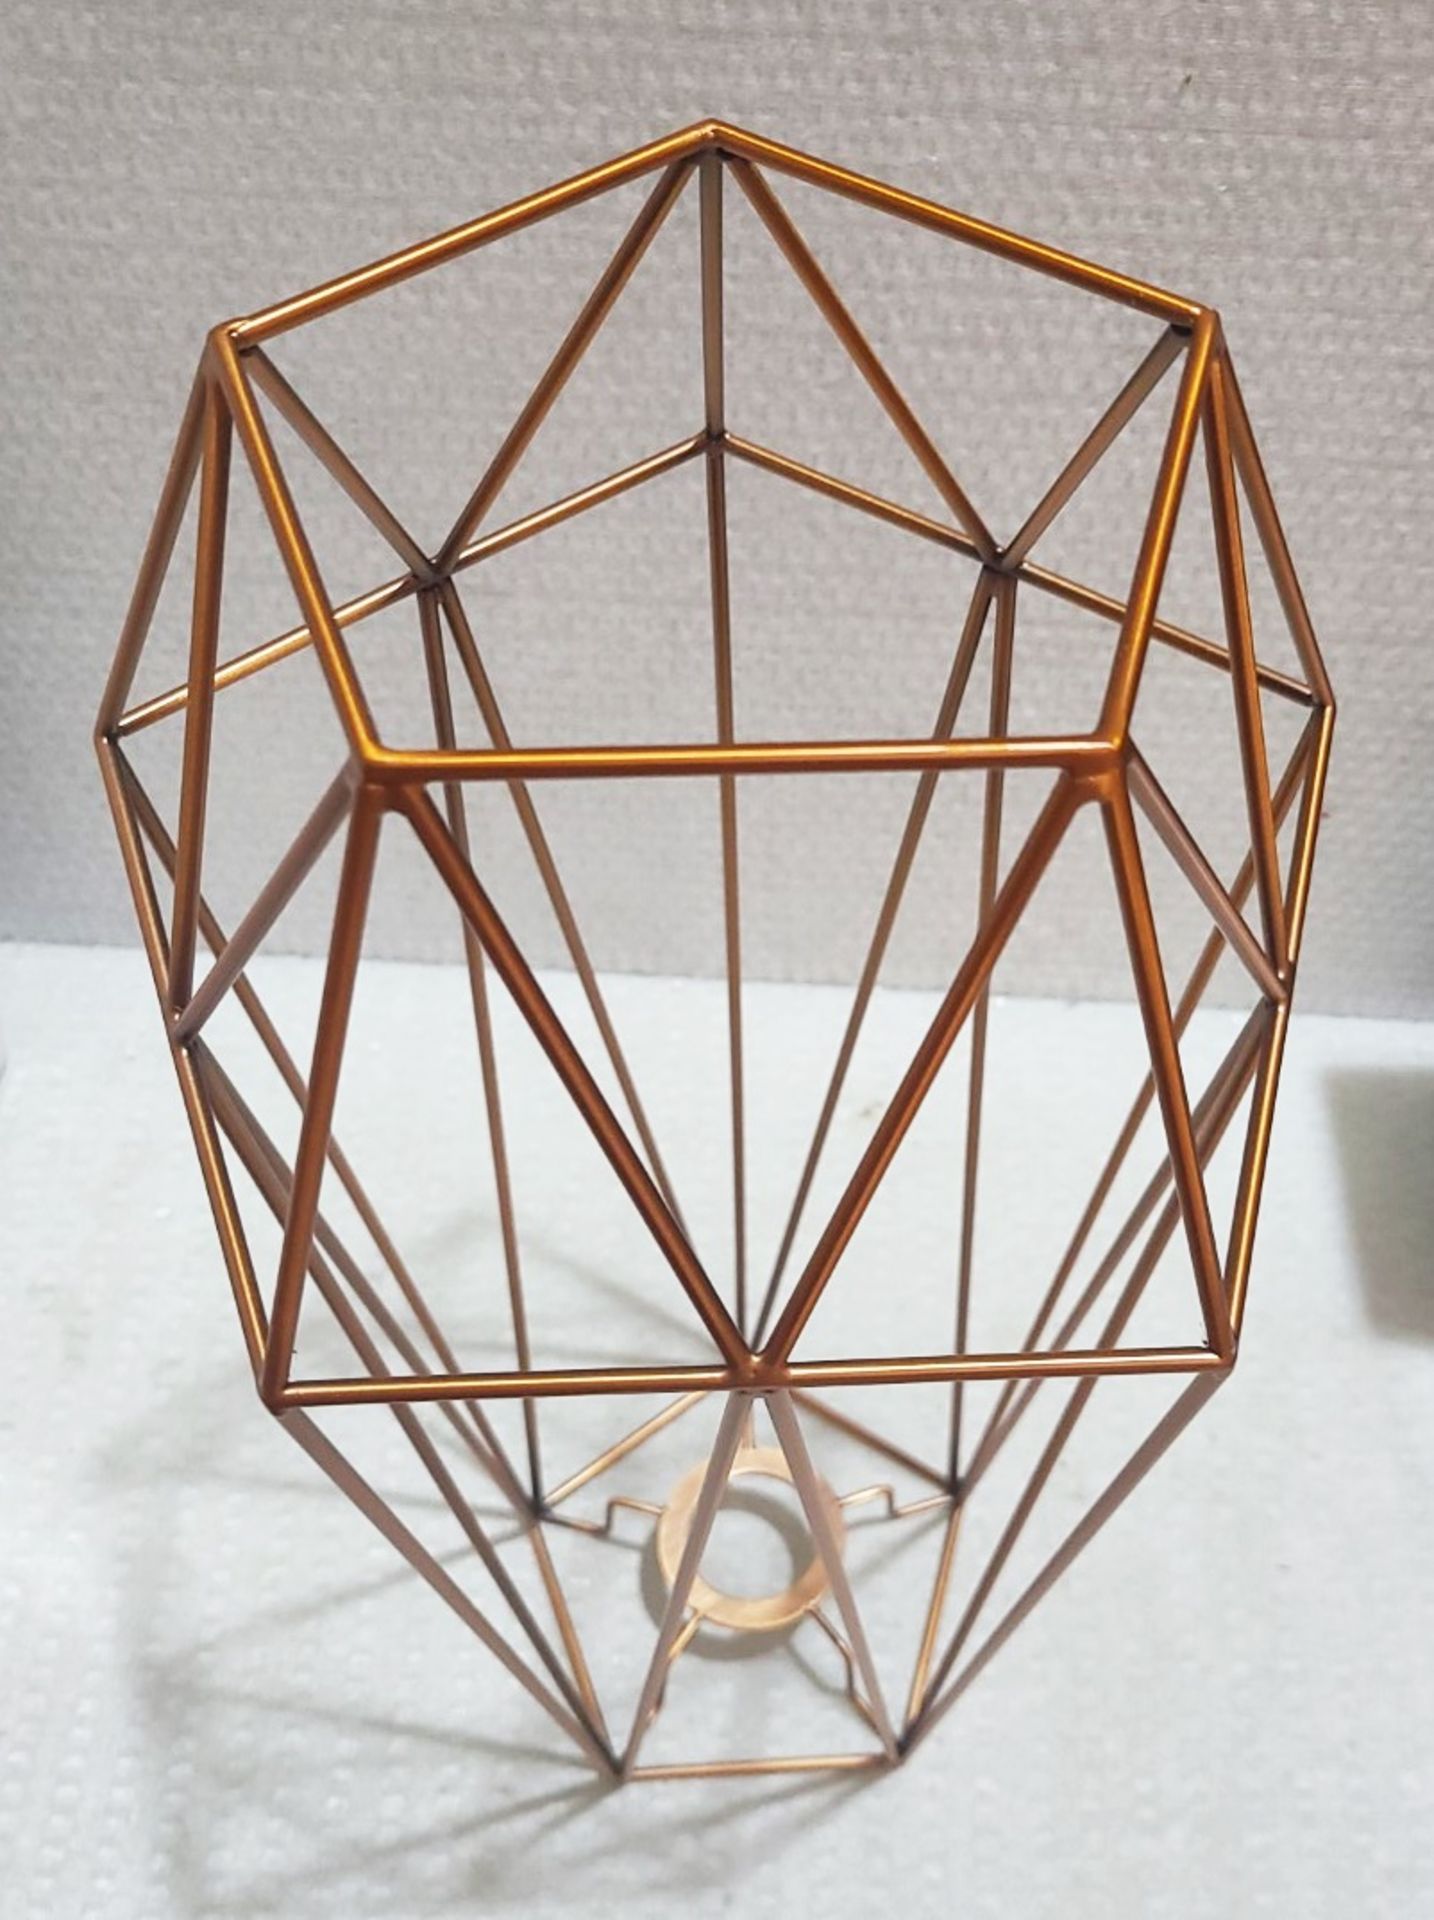 1 x CHELSOM Diamond Table Lamp Copper Metal Cage Shade Geometric Style - Image 3 of 4